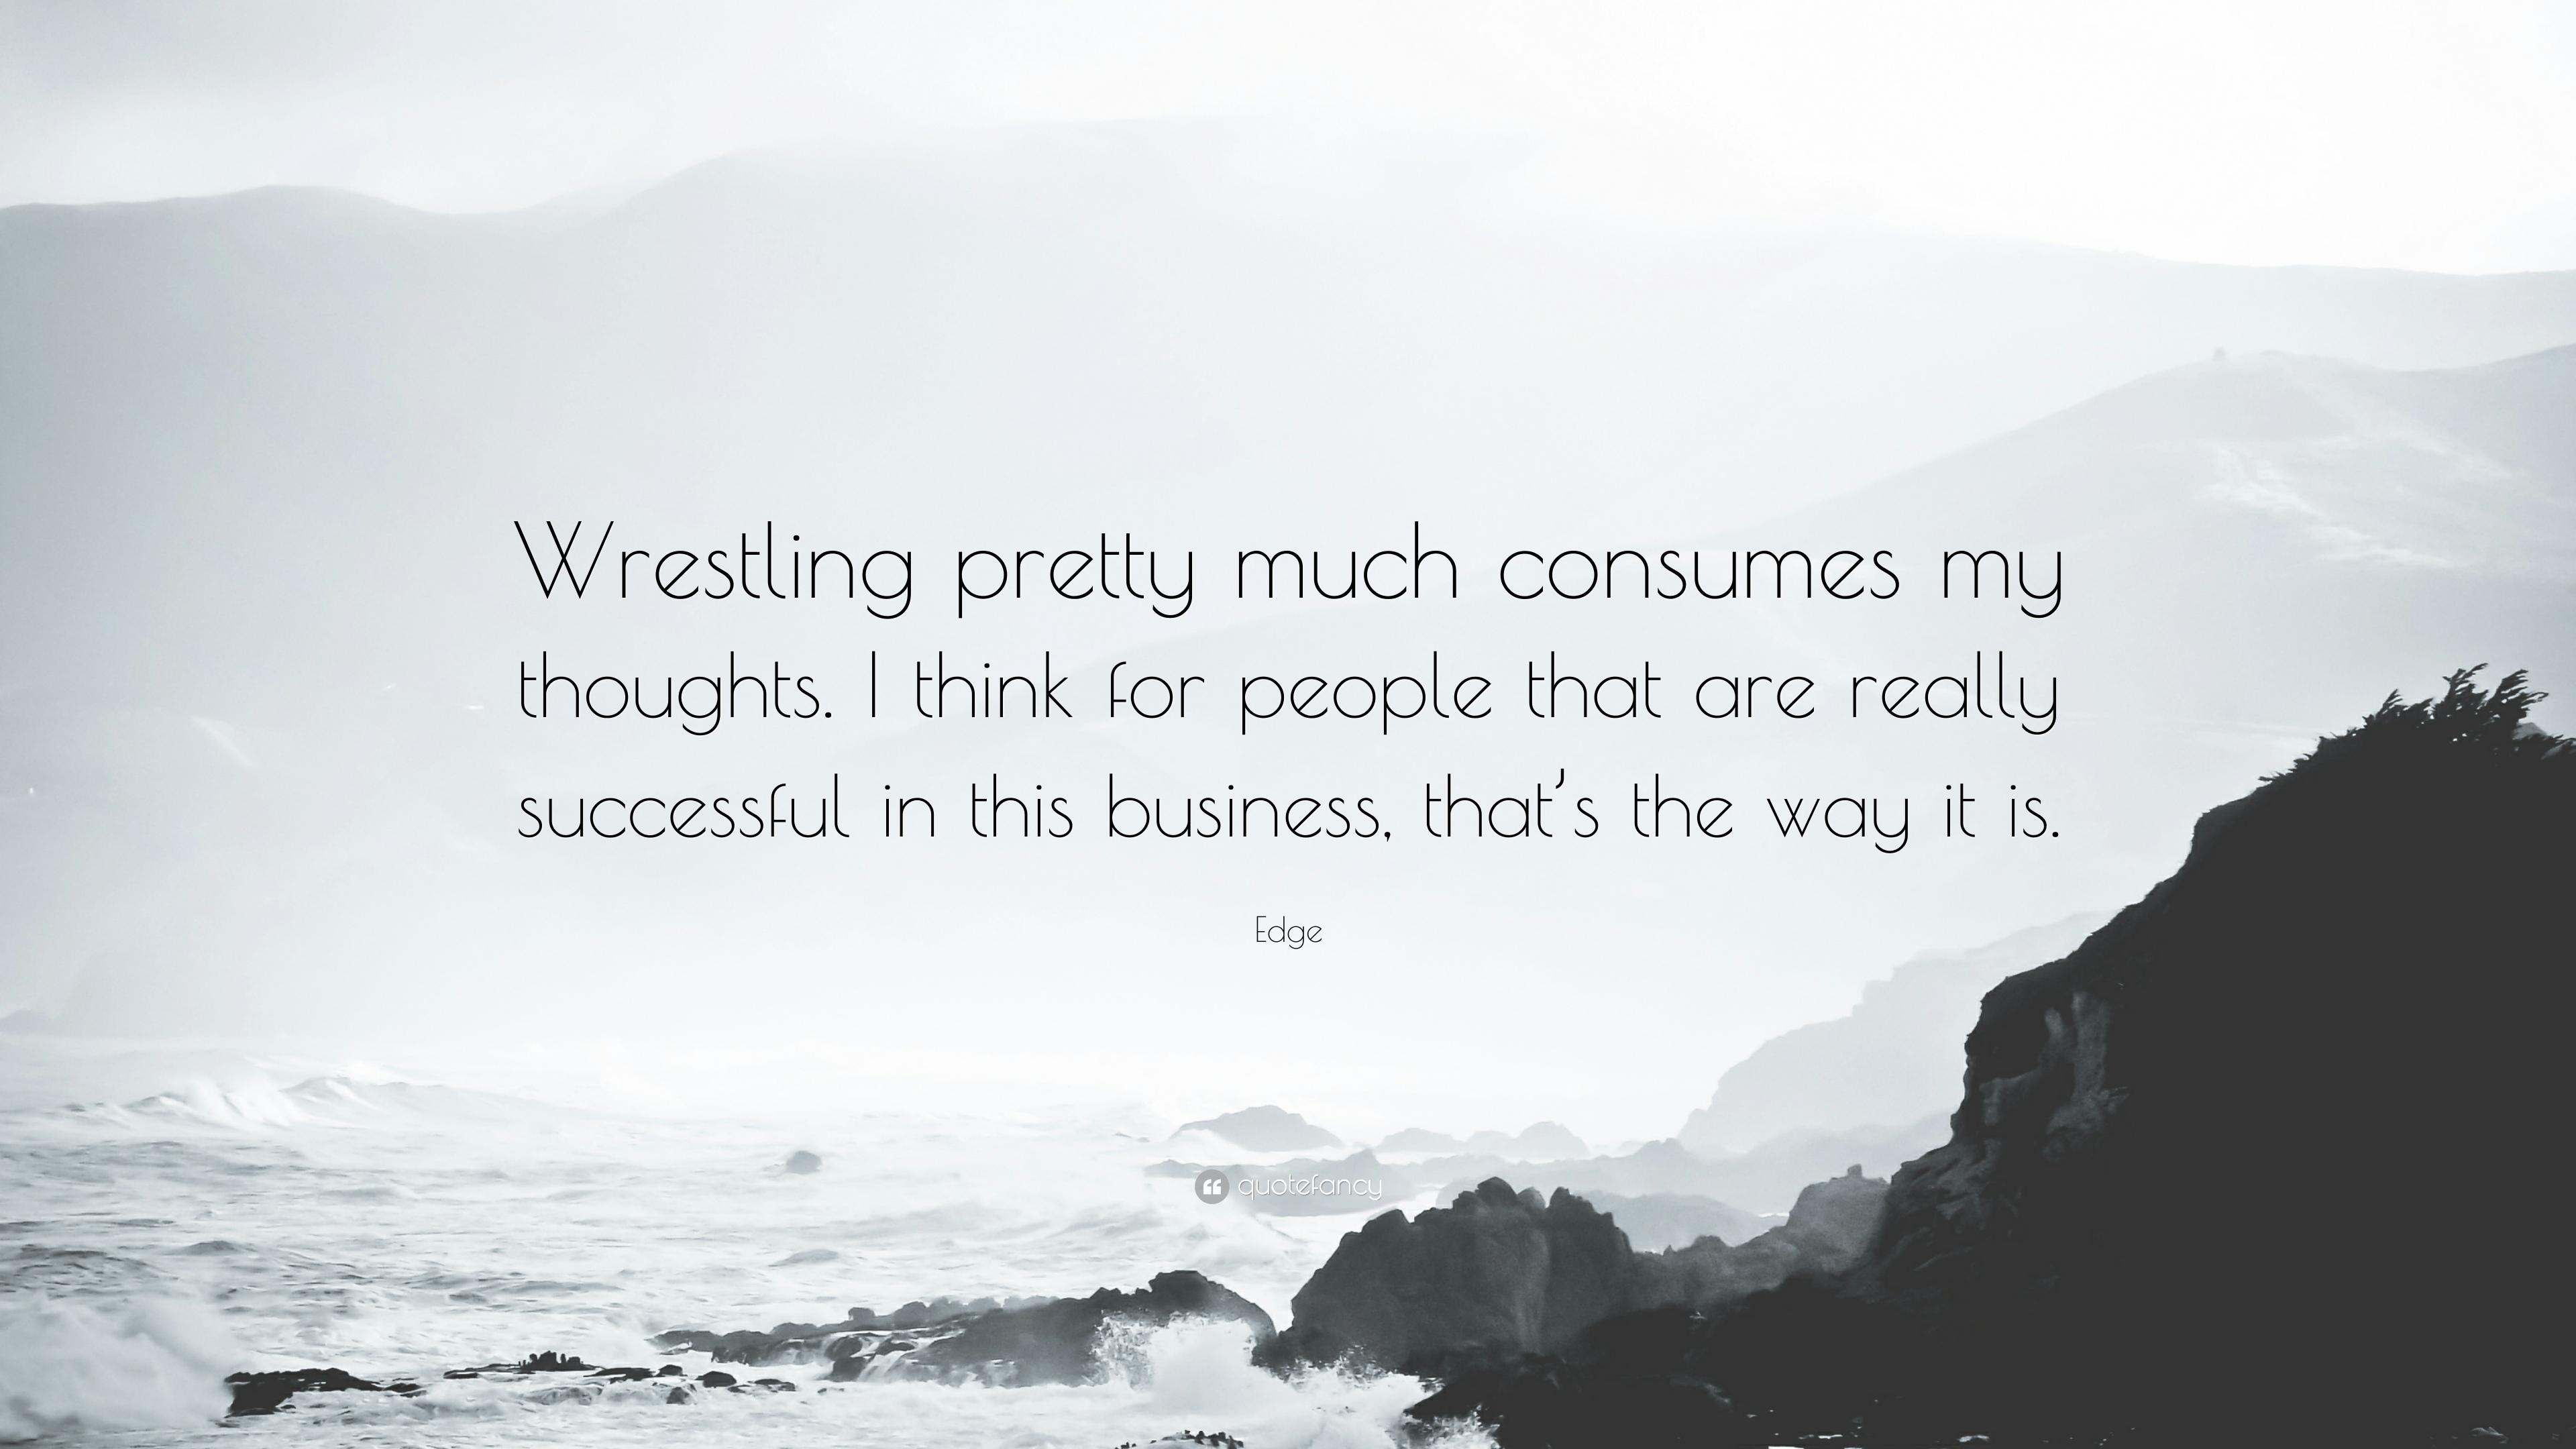 Edge Quote: “Wrestling pretty much consumes my thoughts. I